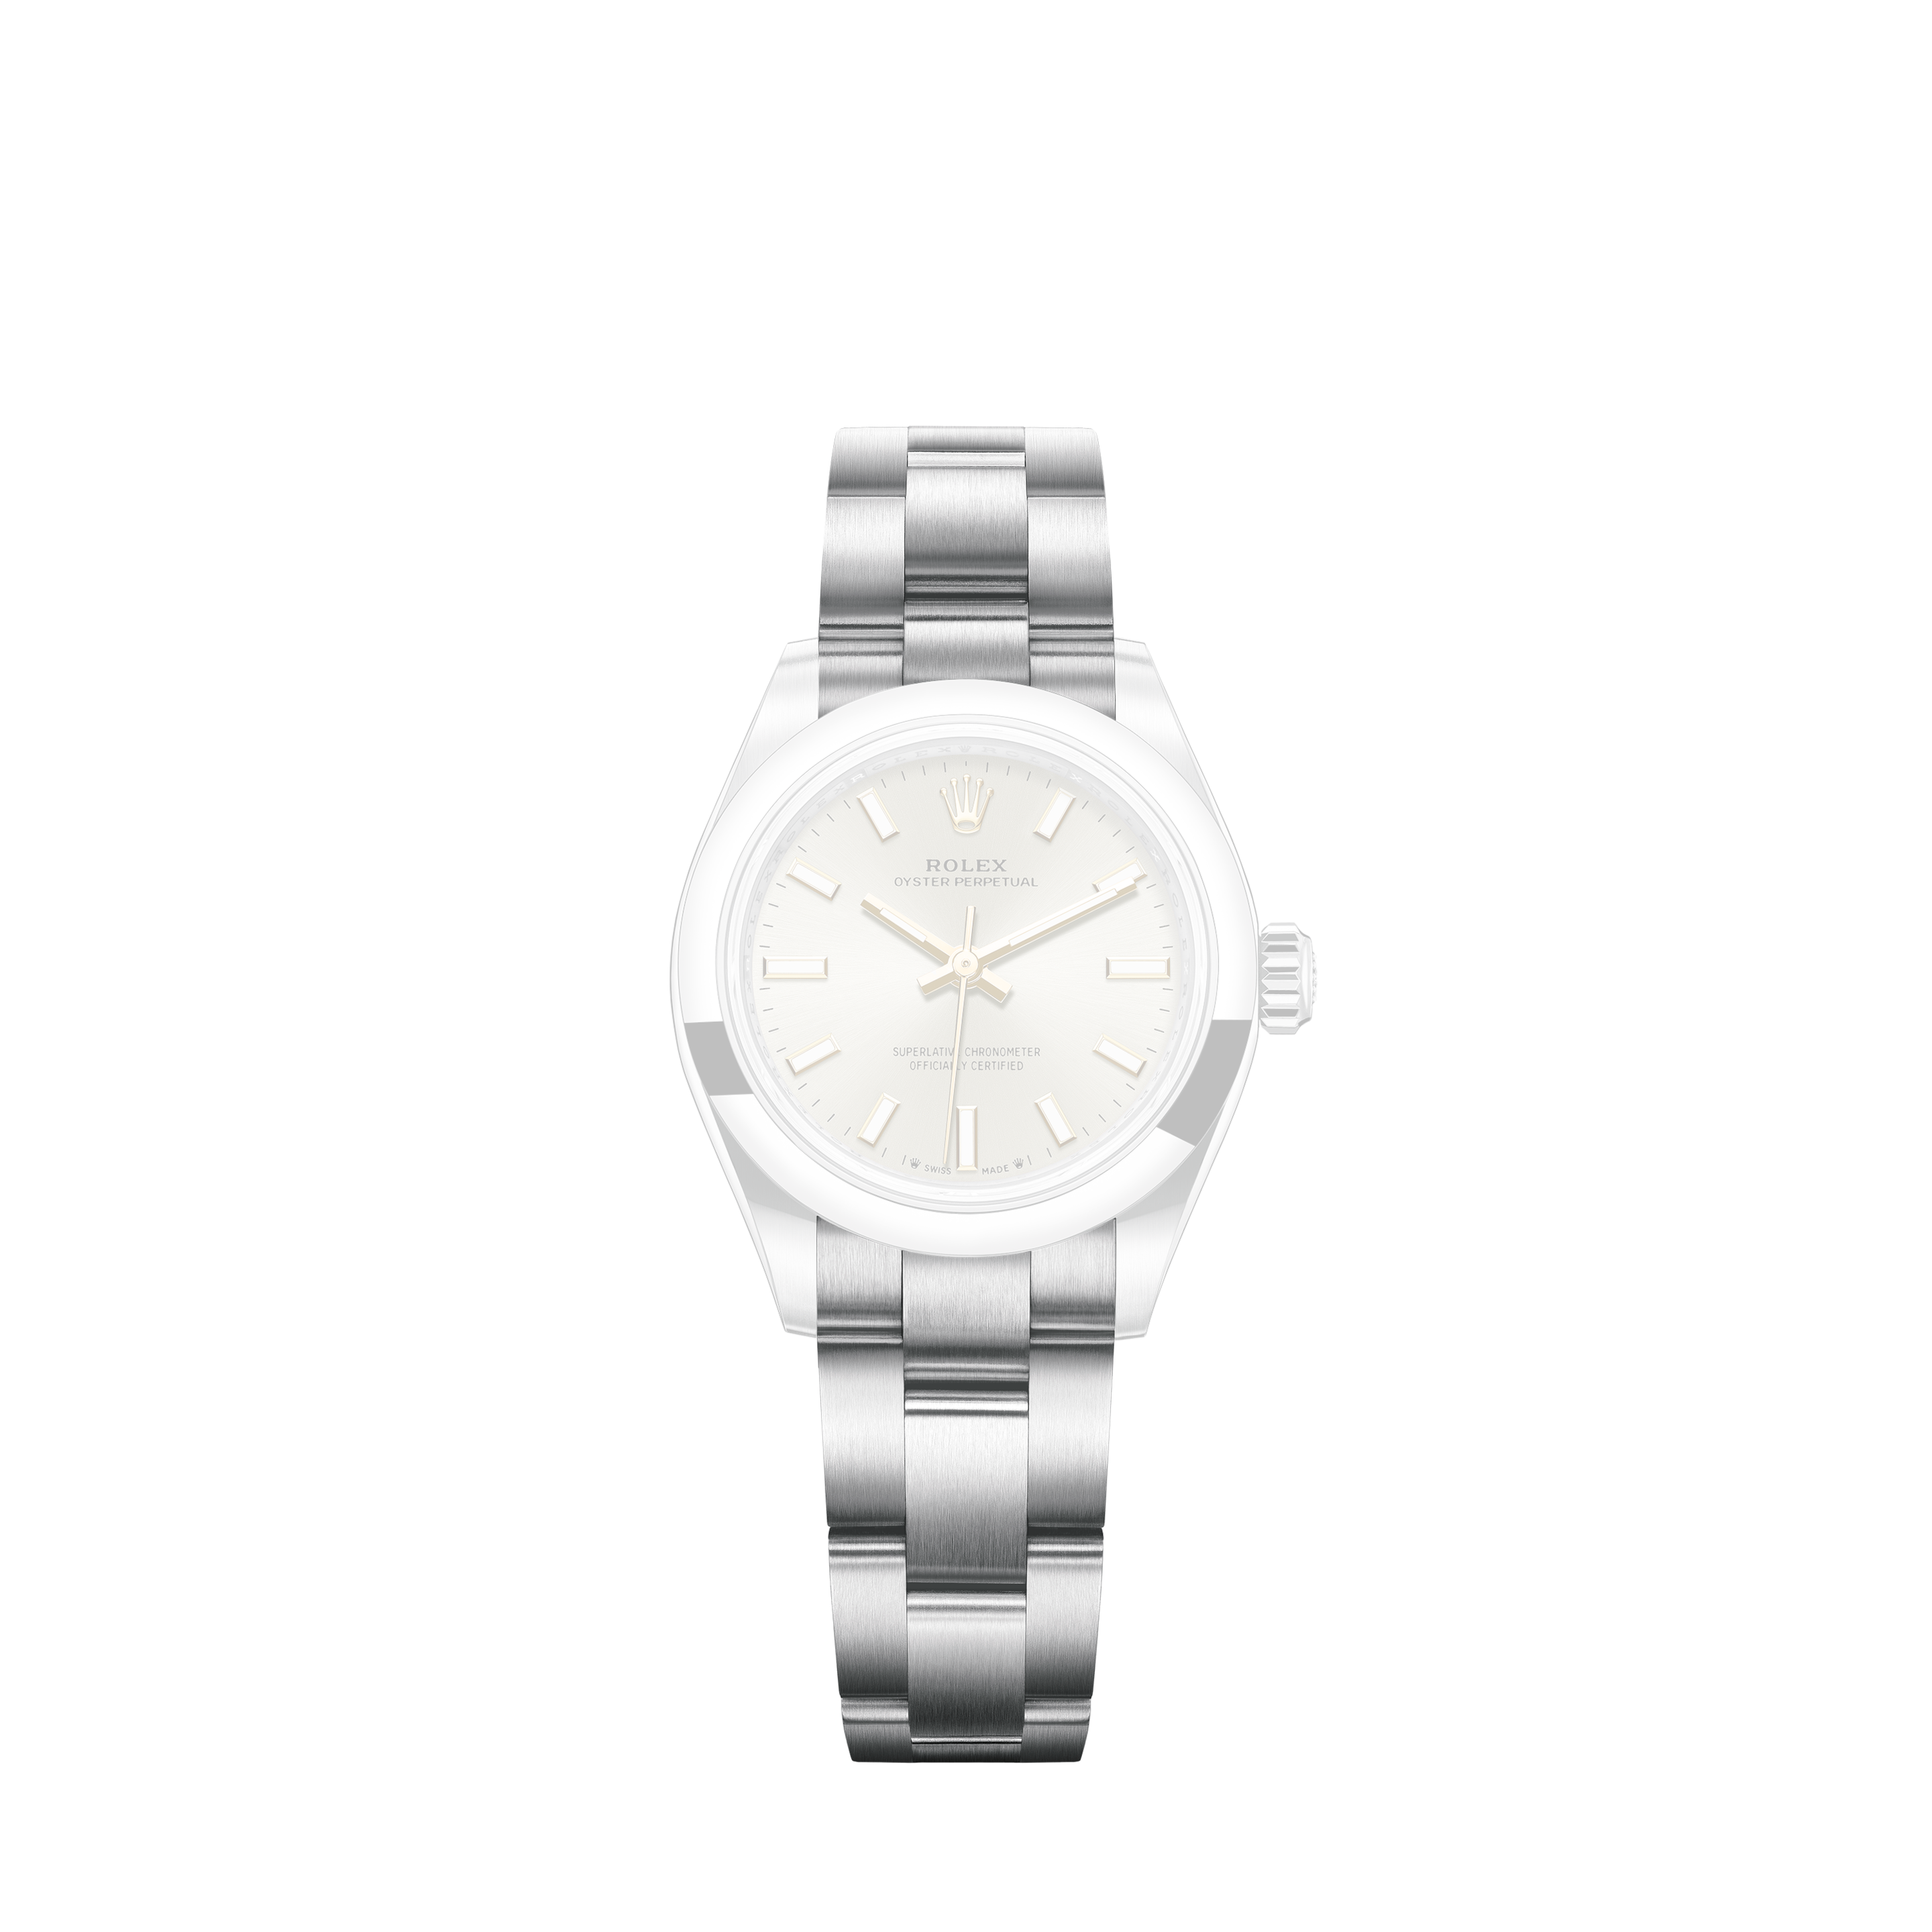 Rolex Oyster Perpetual Datejust Discreet Jubilee Design White Dial with Diamonds 2 Tone 36mm WatchRolex Oyster Perpetual Datejust 36 Ref. 126234